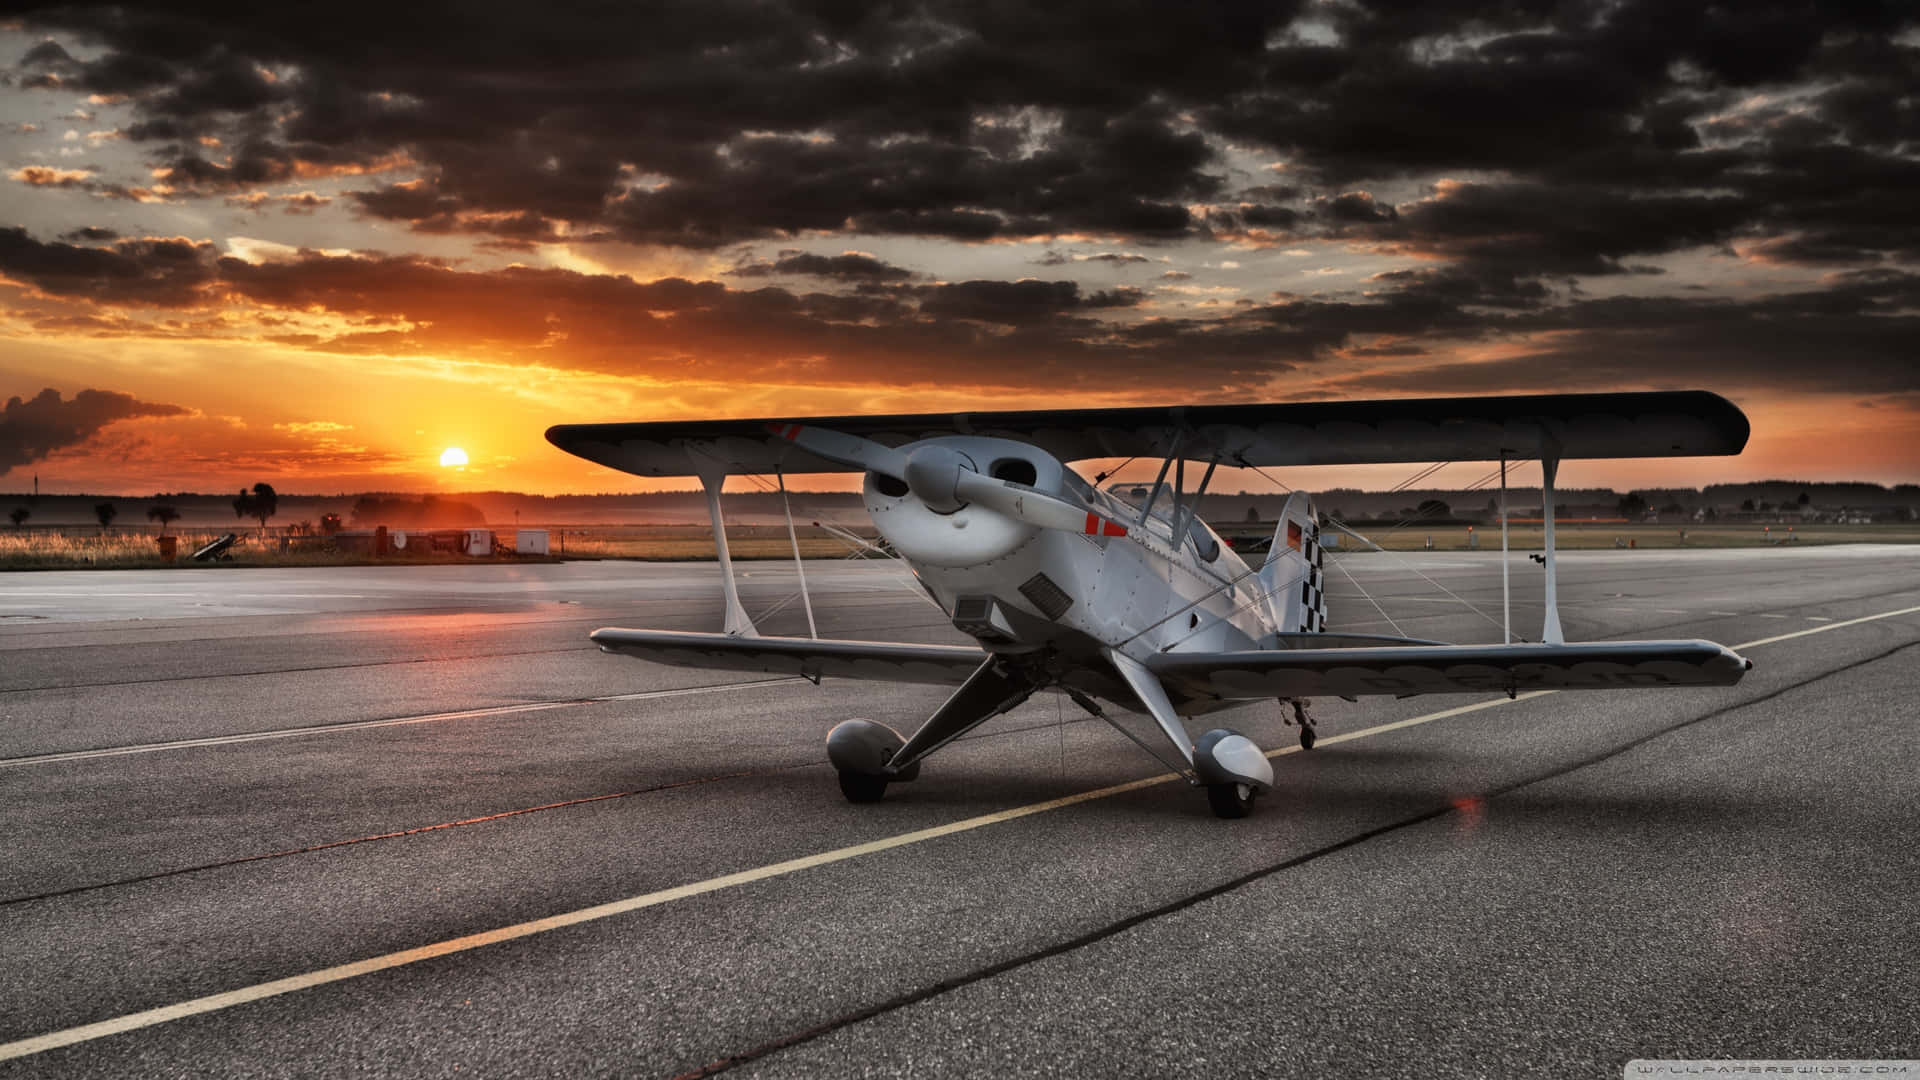 Take to the Skies with these Super Small Planes